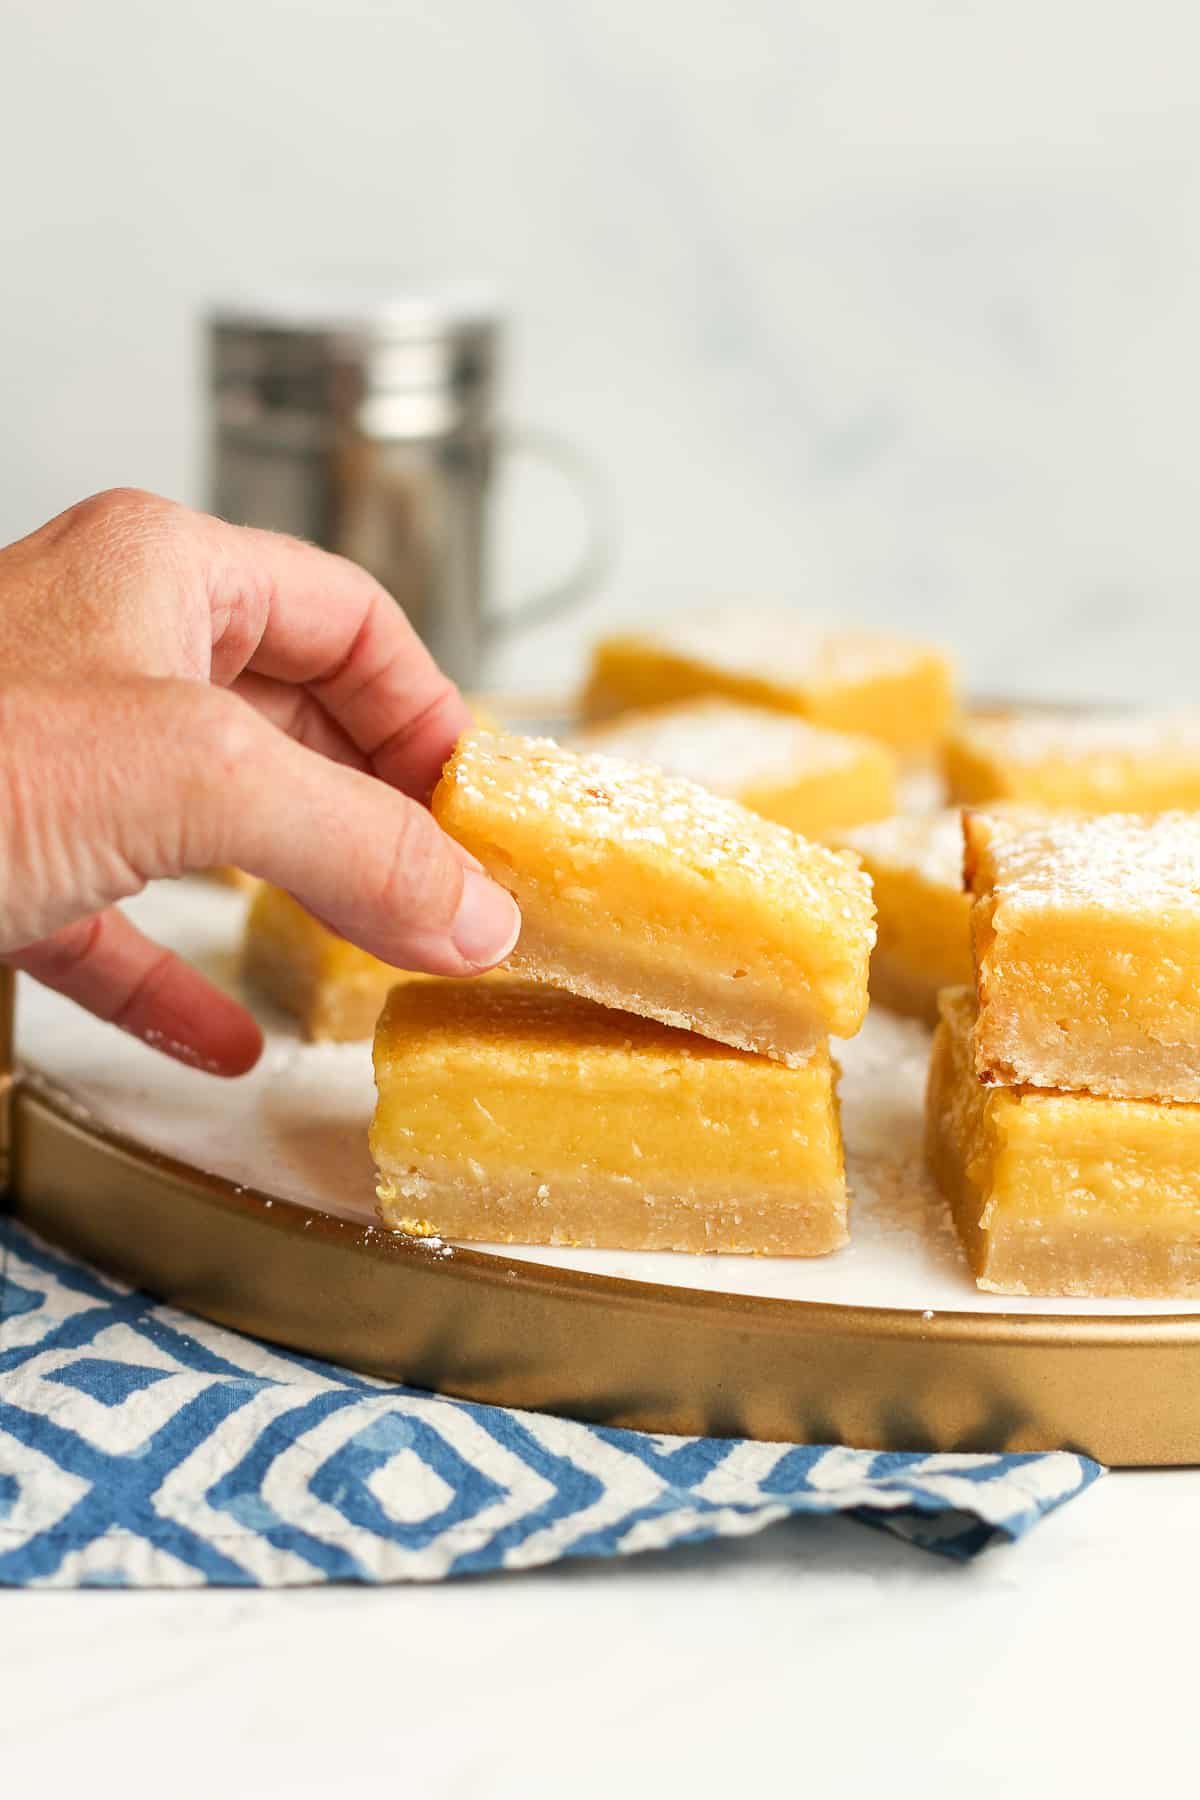 A hand lifting a lemon bar off of a white tray.